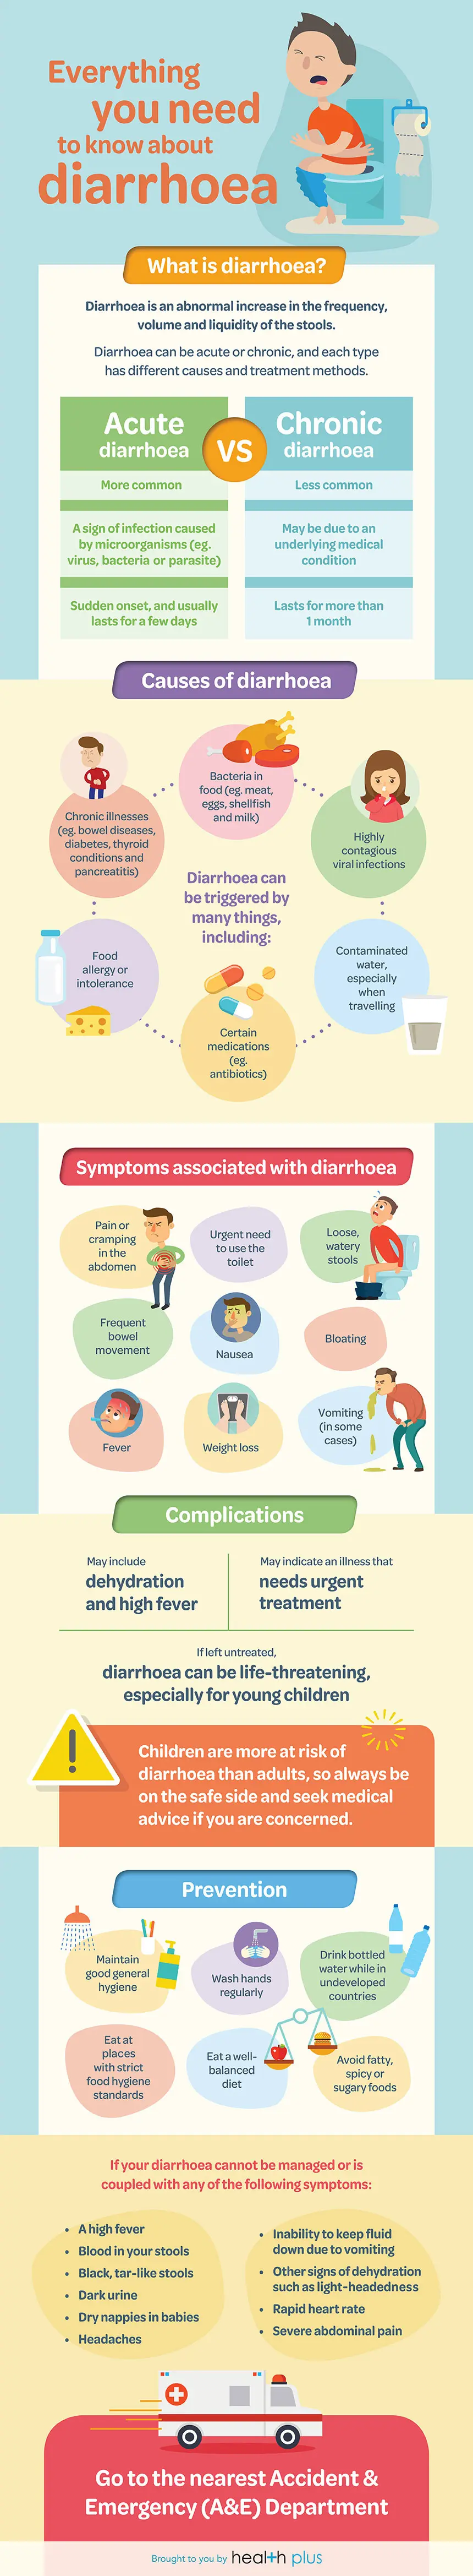 Everything you need to know about diarrhoea